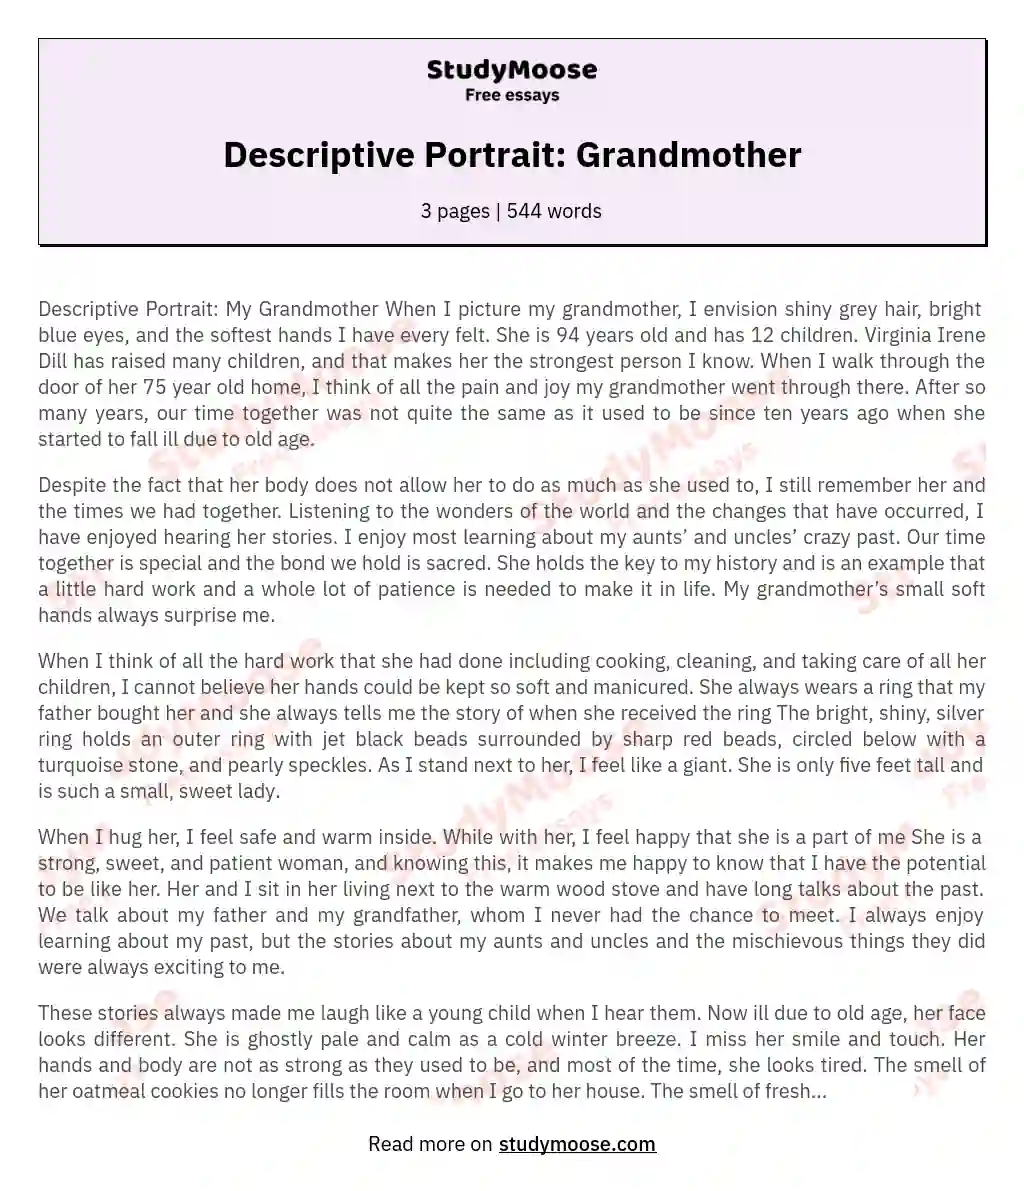 profile essay about my grandmother